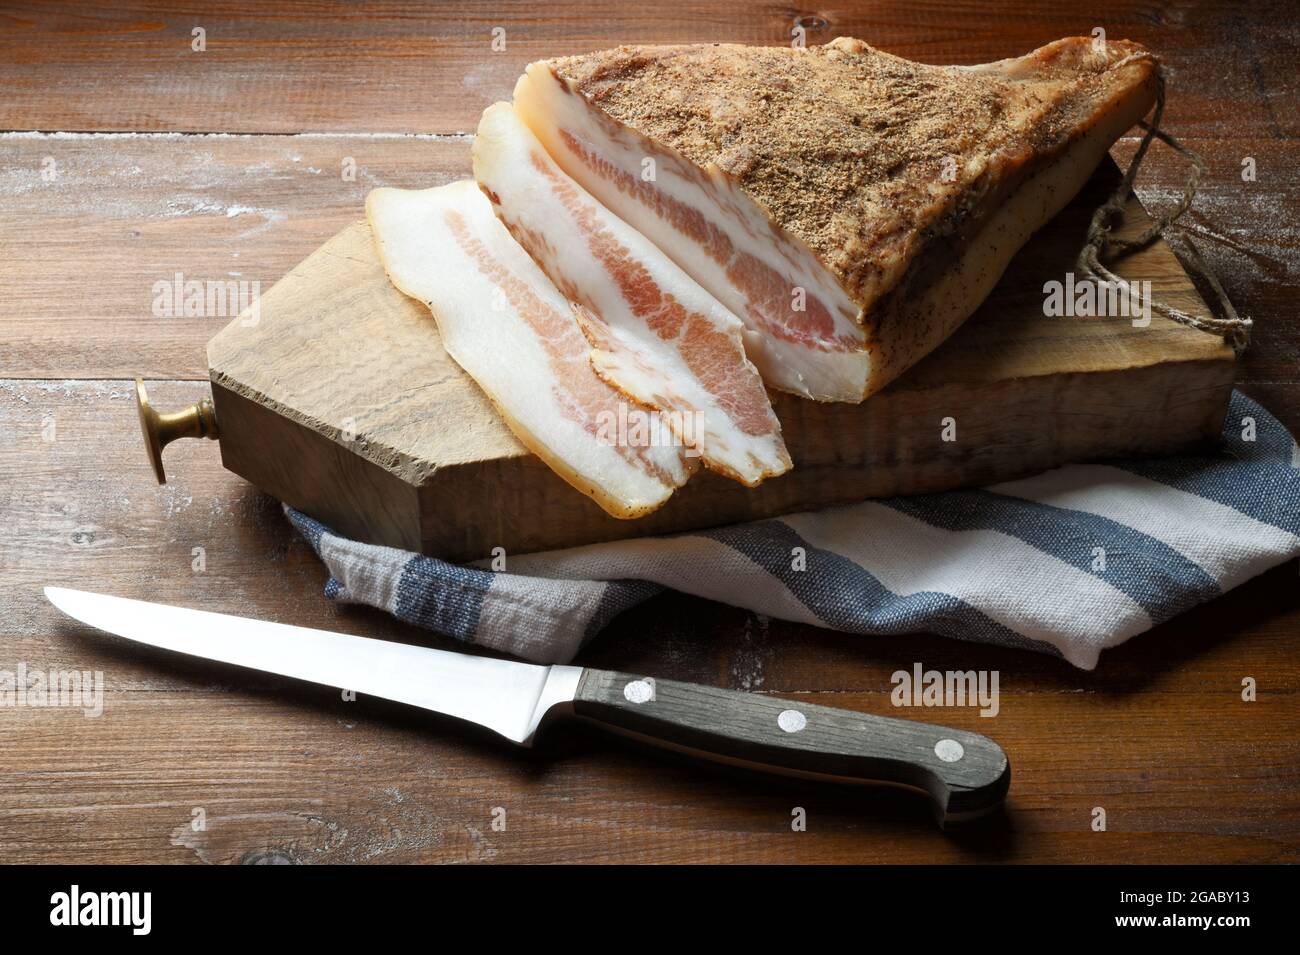 Guanciale Amatriciano with cutting board and knife on wooden table. The guanciale is a pork sausage typical of central Italy. Close-up, space for text Stock Photo